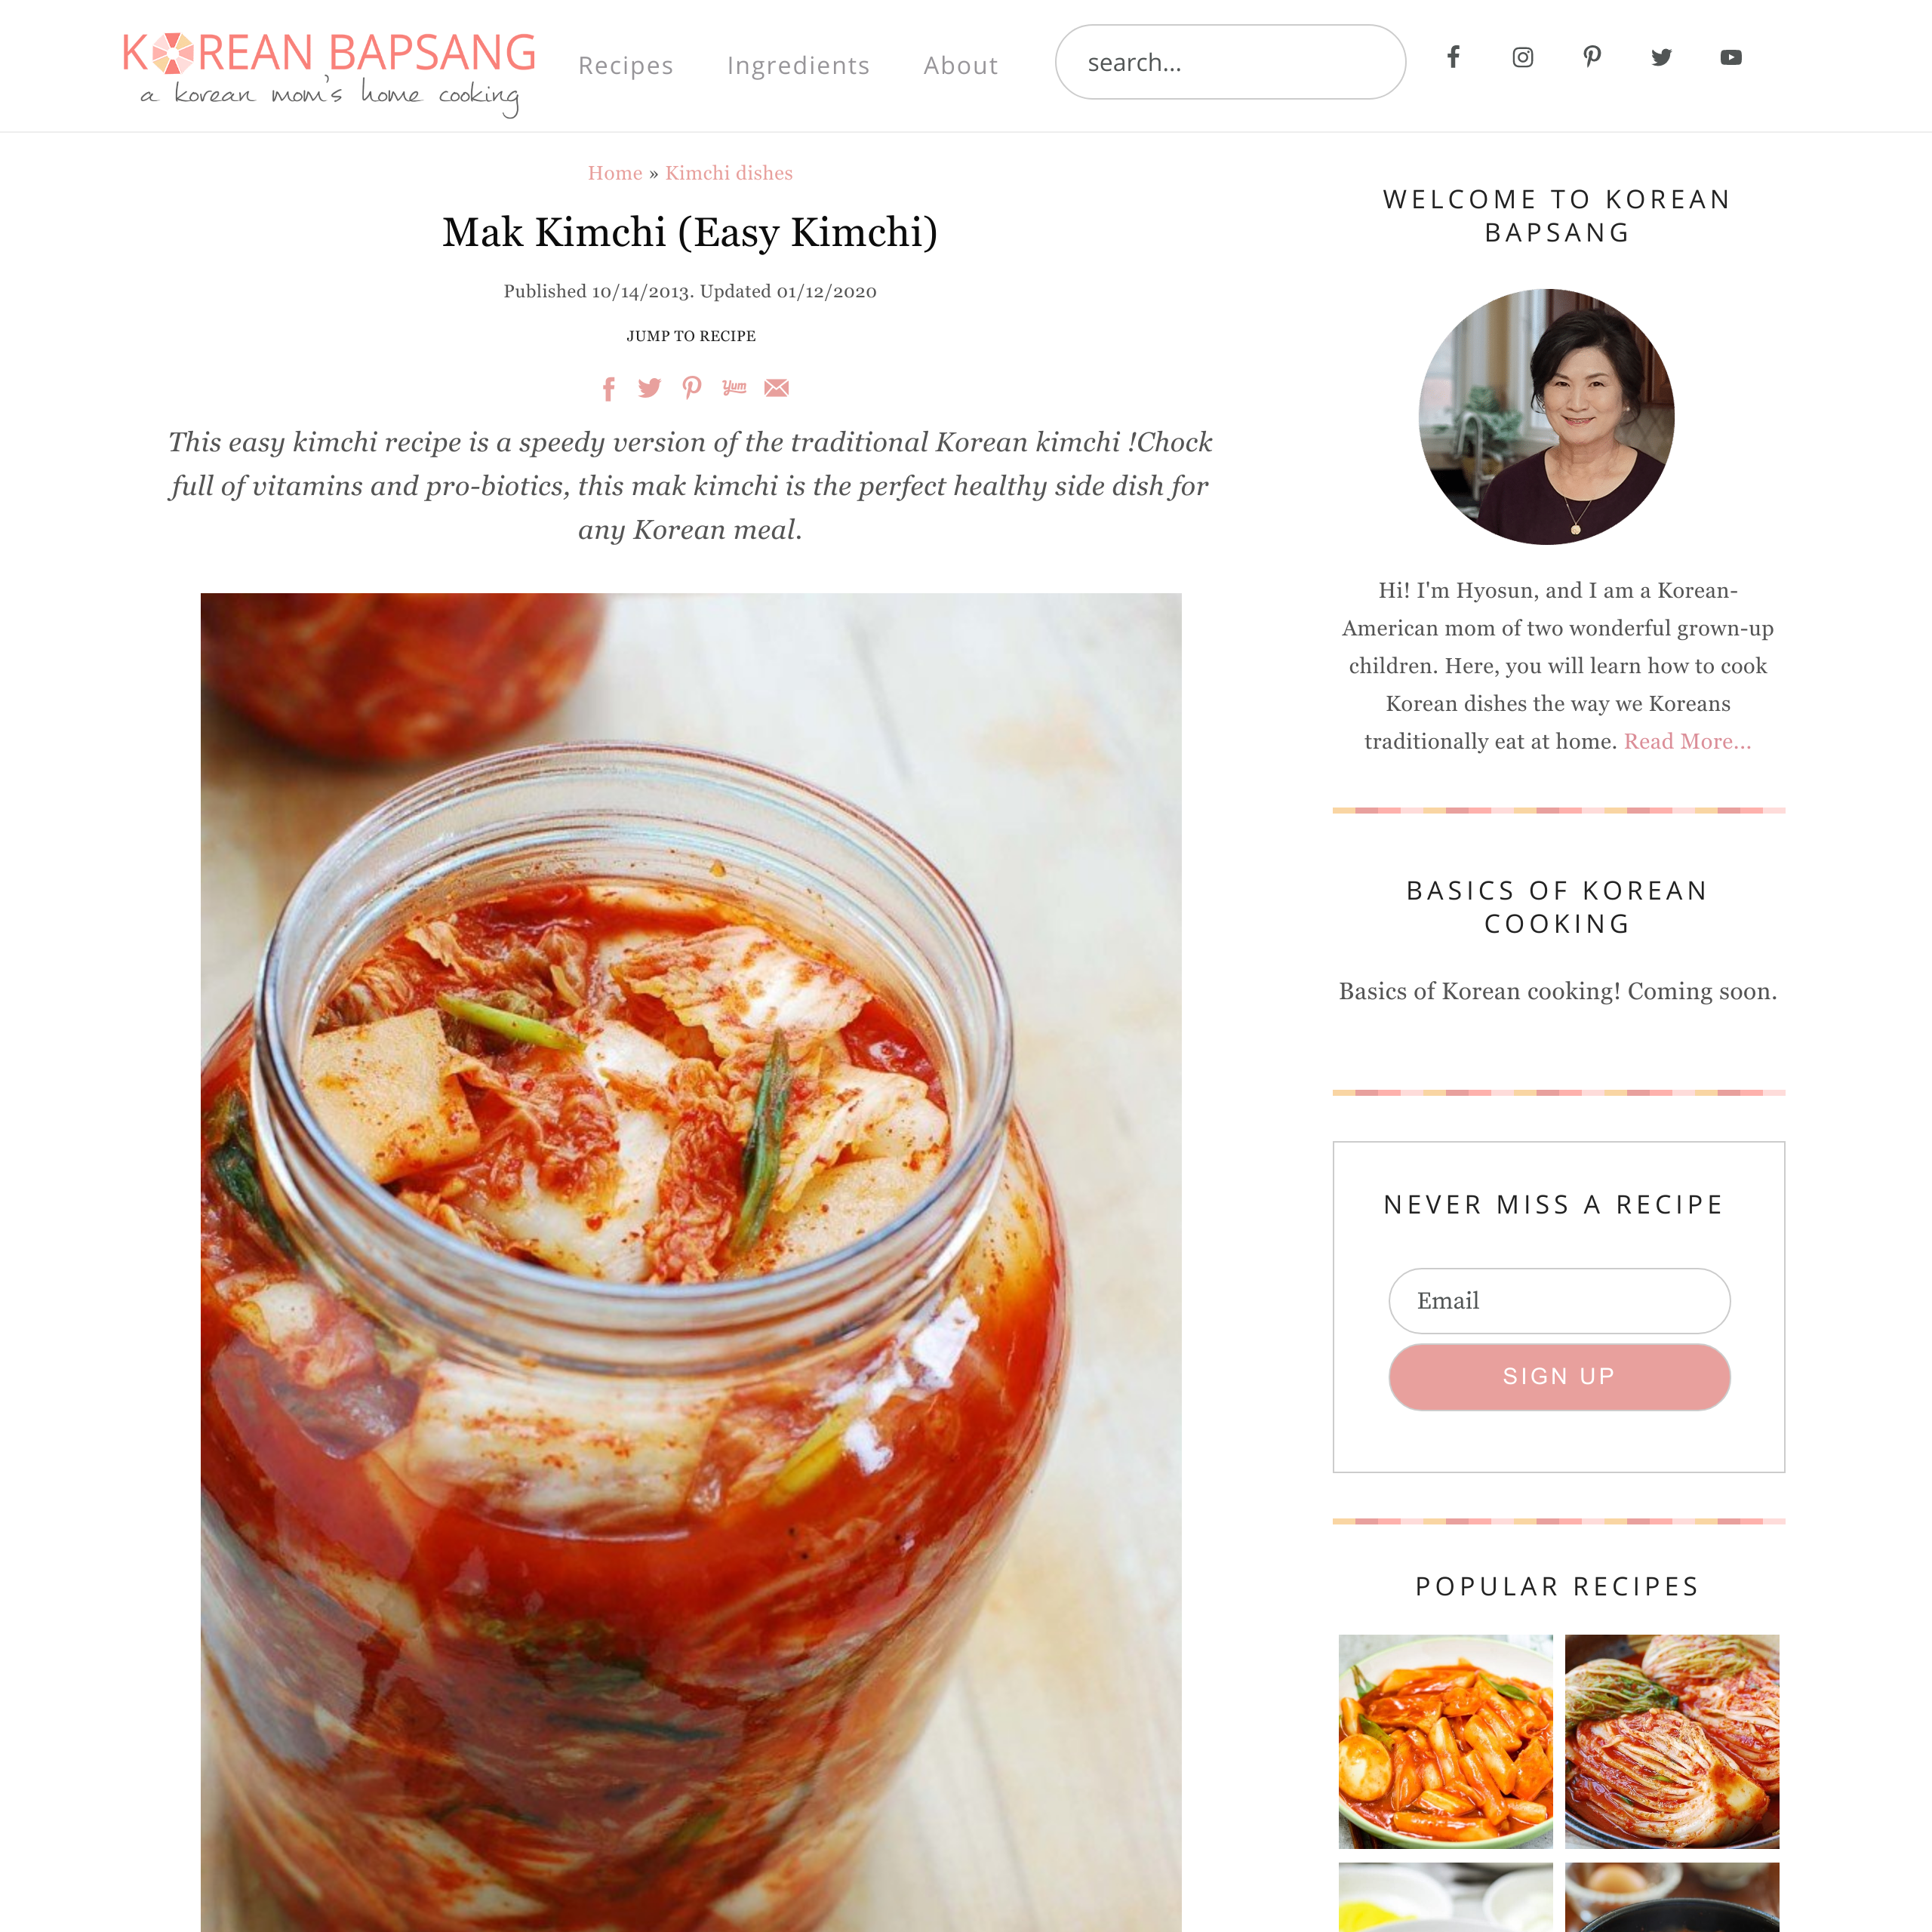 Easy Kimchi Recipe  Authentic and Delicious - Korean Bapsang